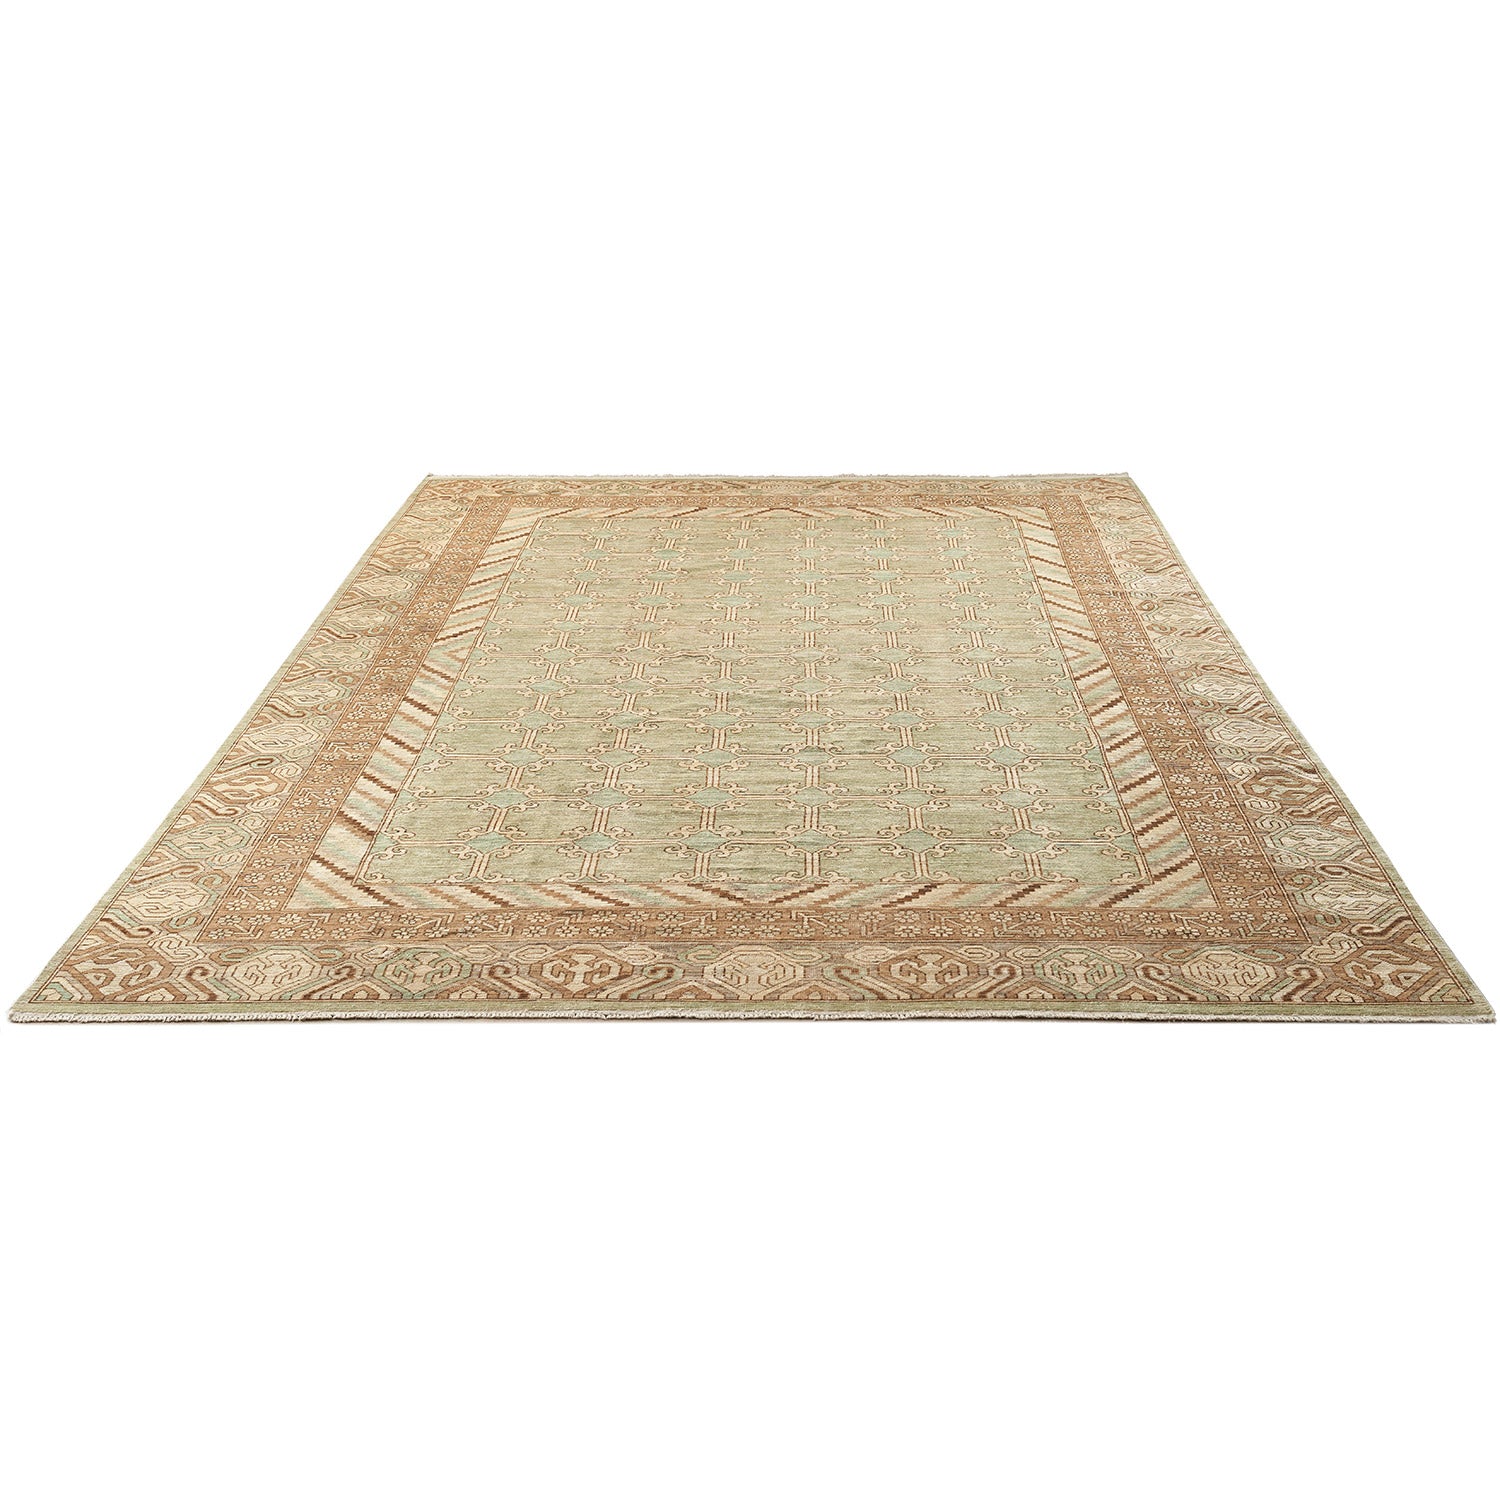 Exquisite hand-crafted rectangular rug with elegant green geometric pattern